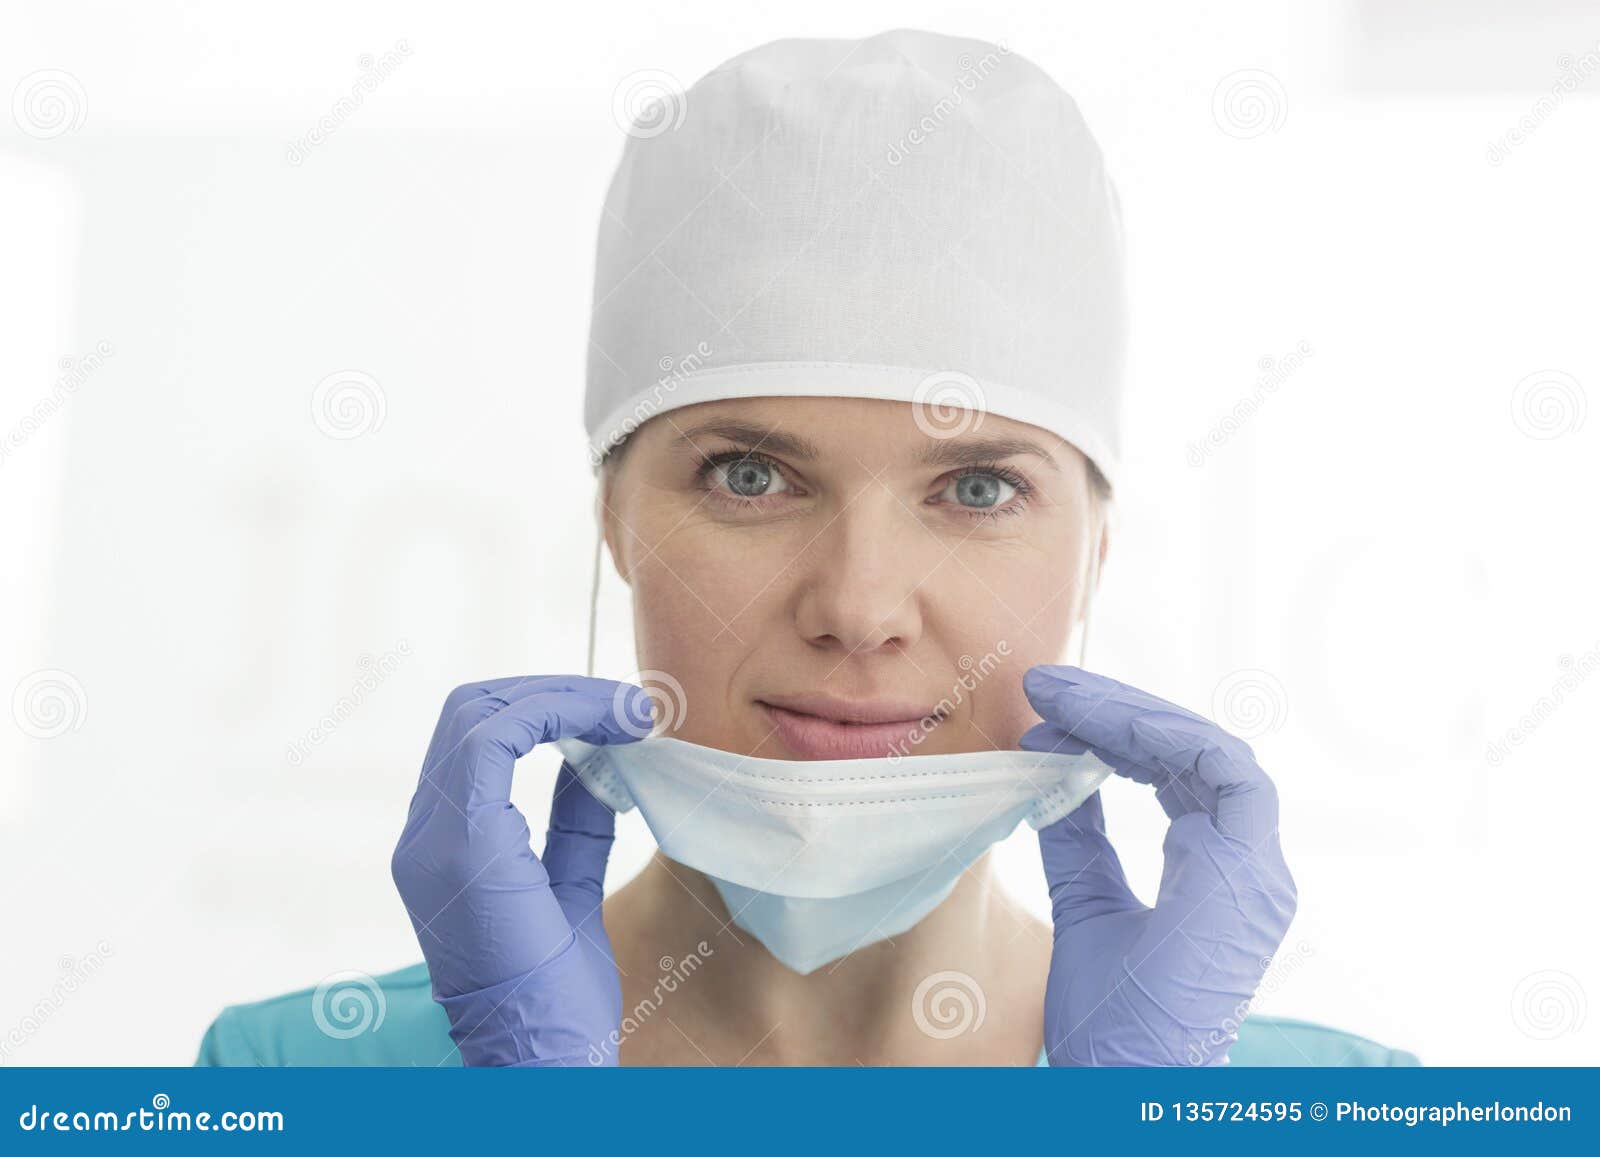 masque chirurgical sourire